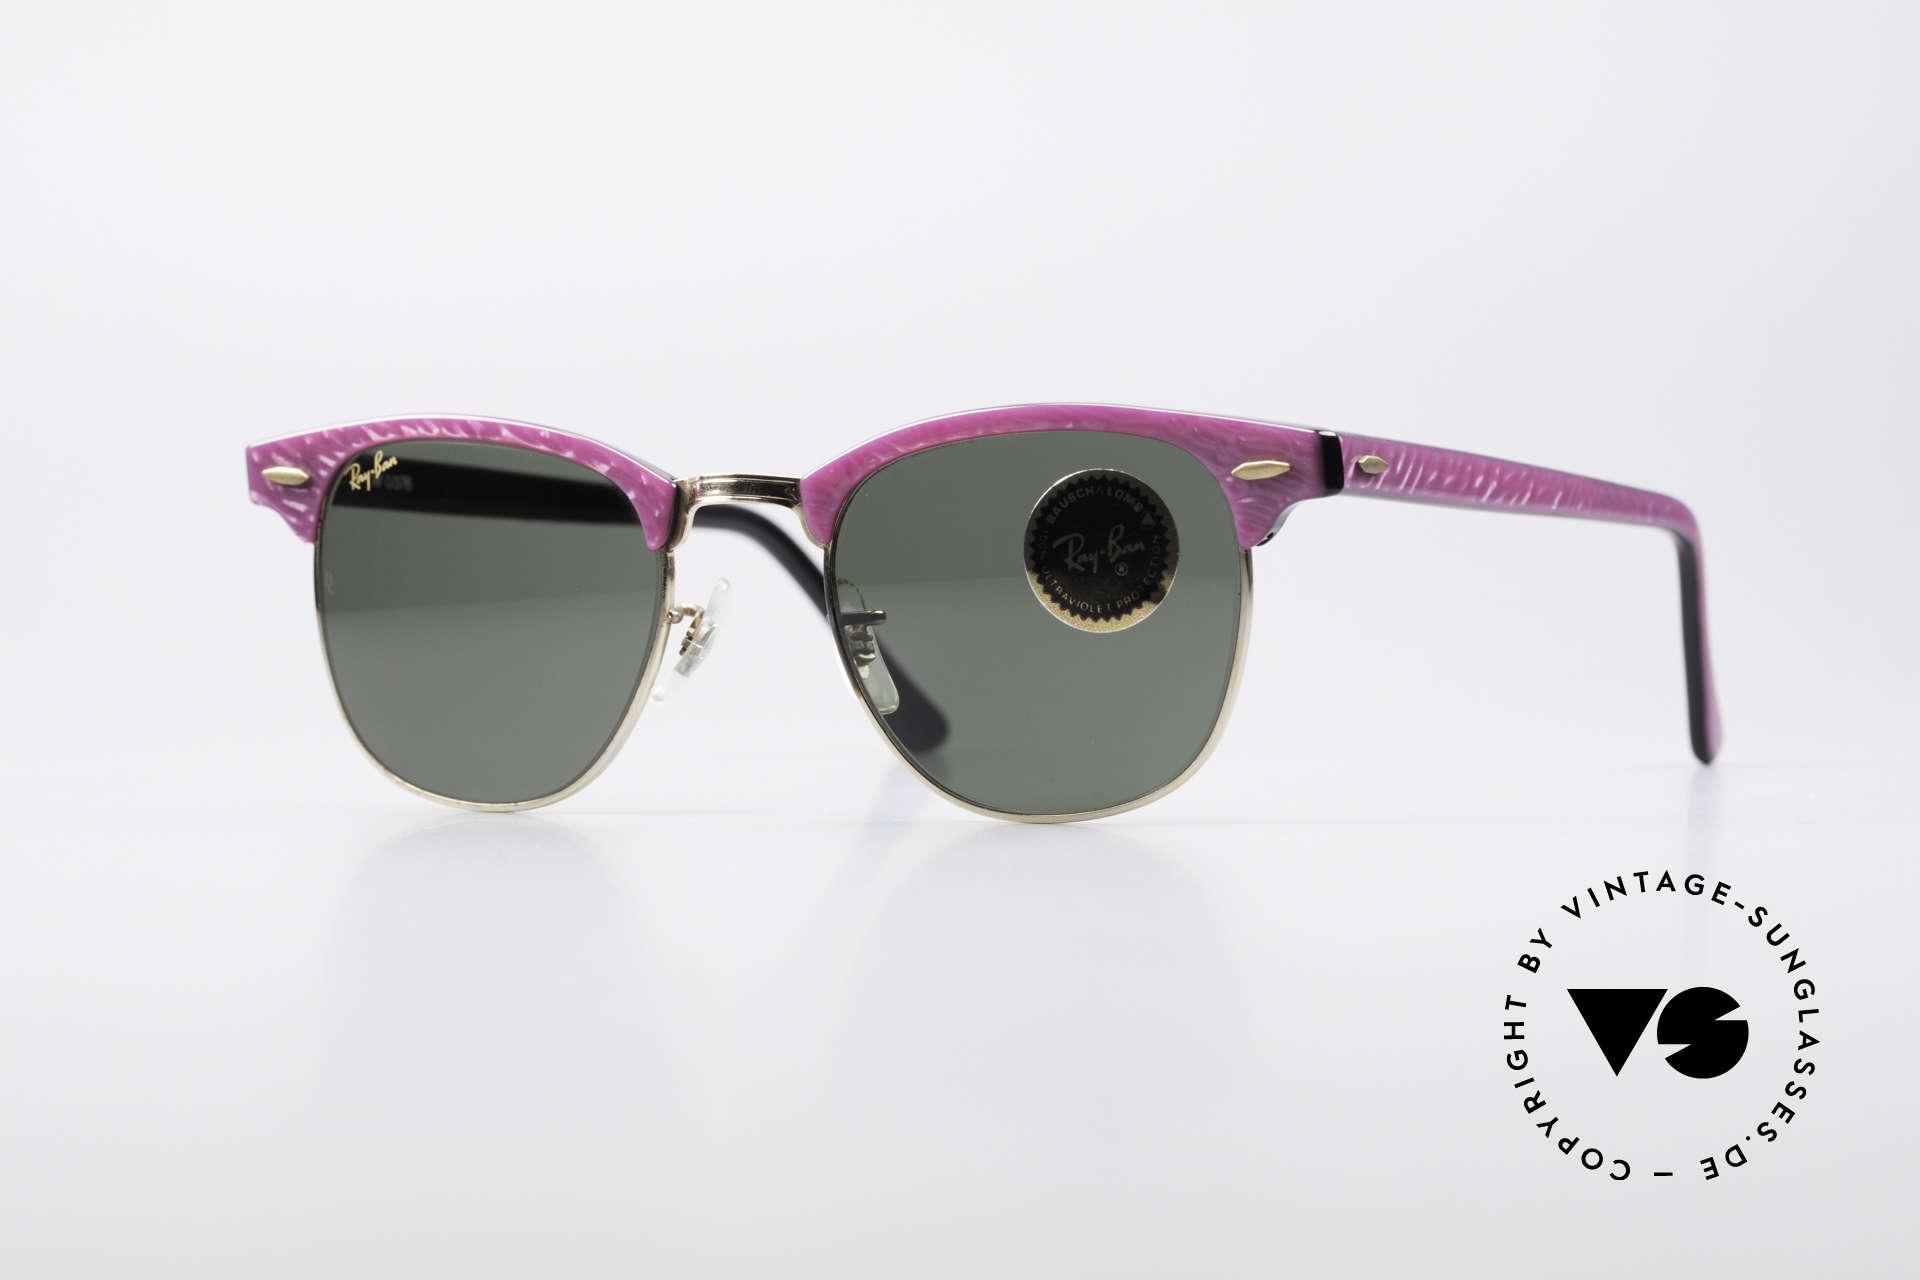 ray ban sunglasses by bausch & lomb